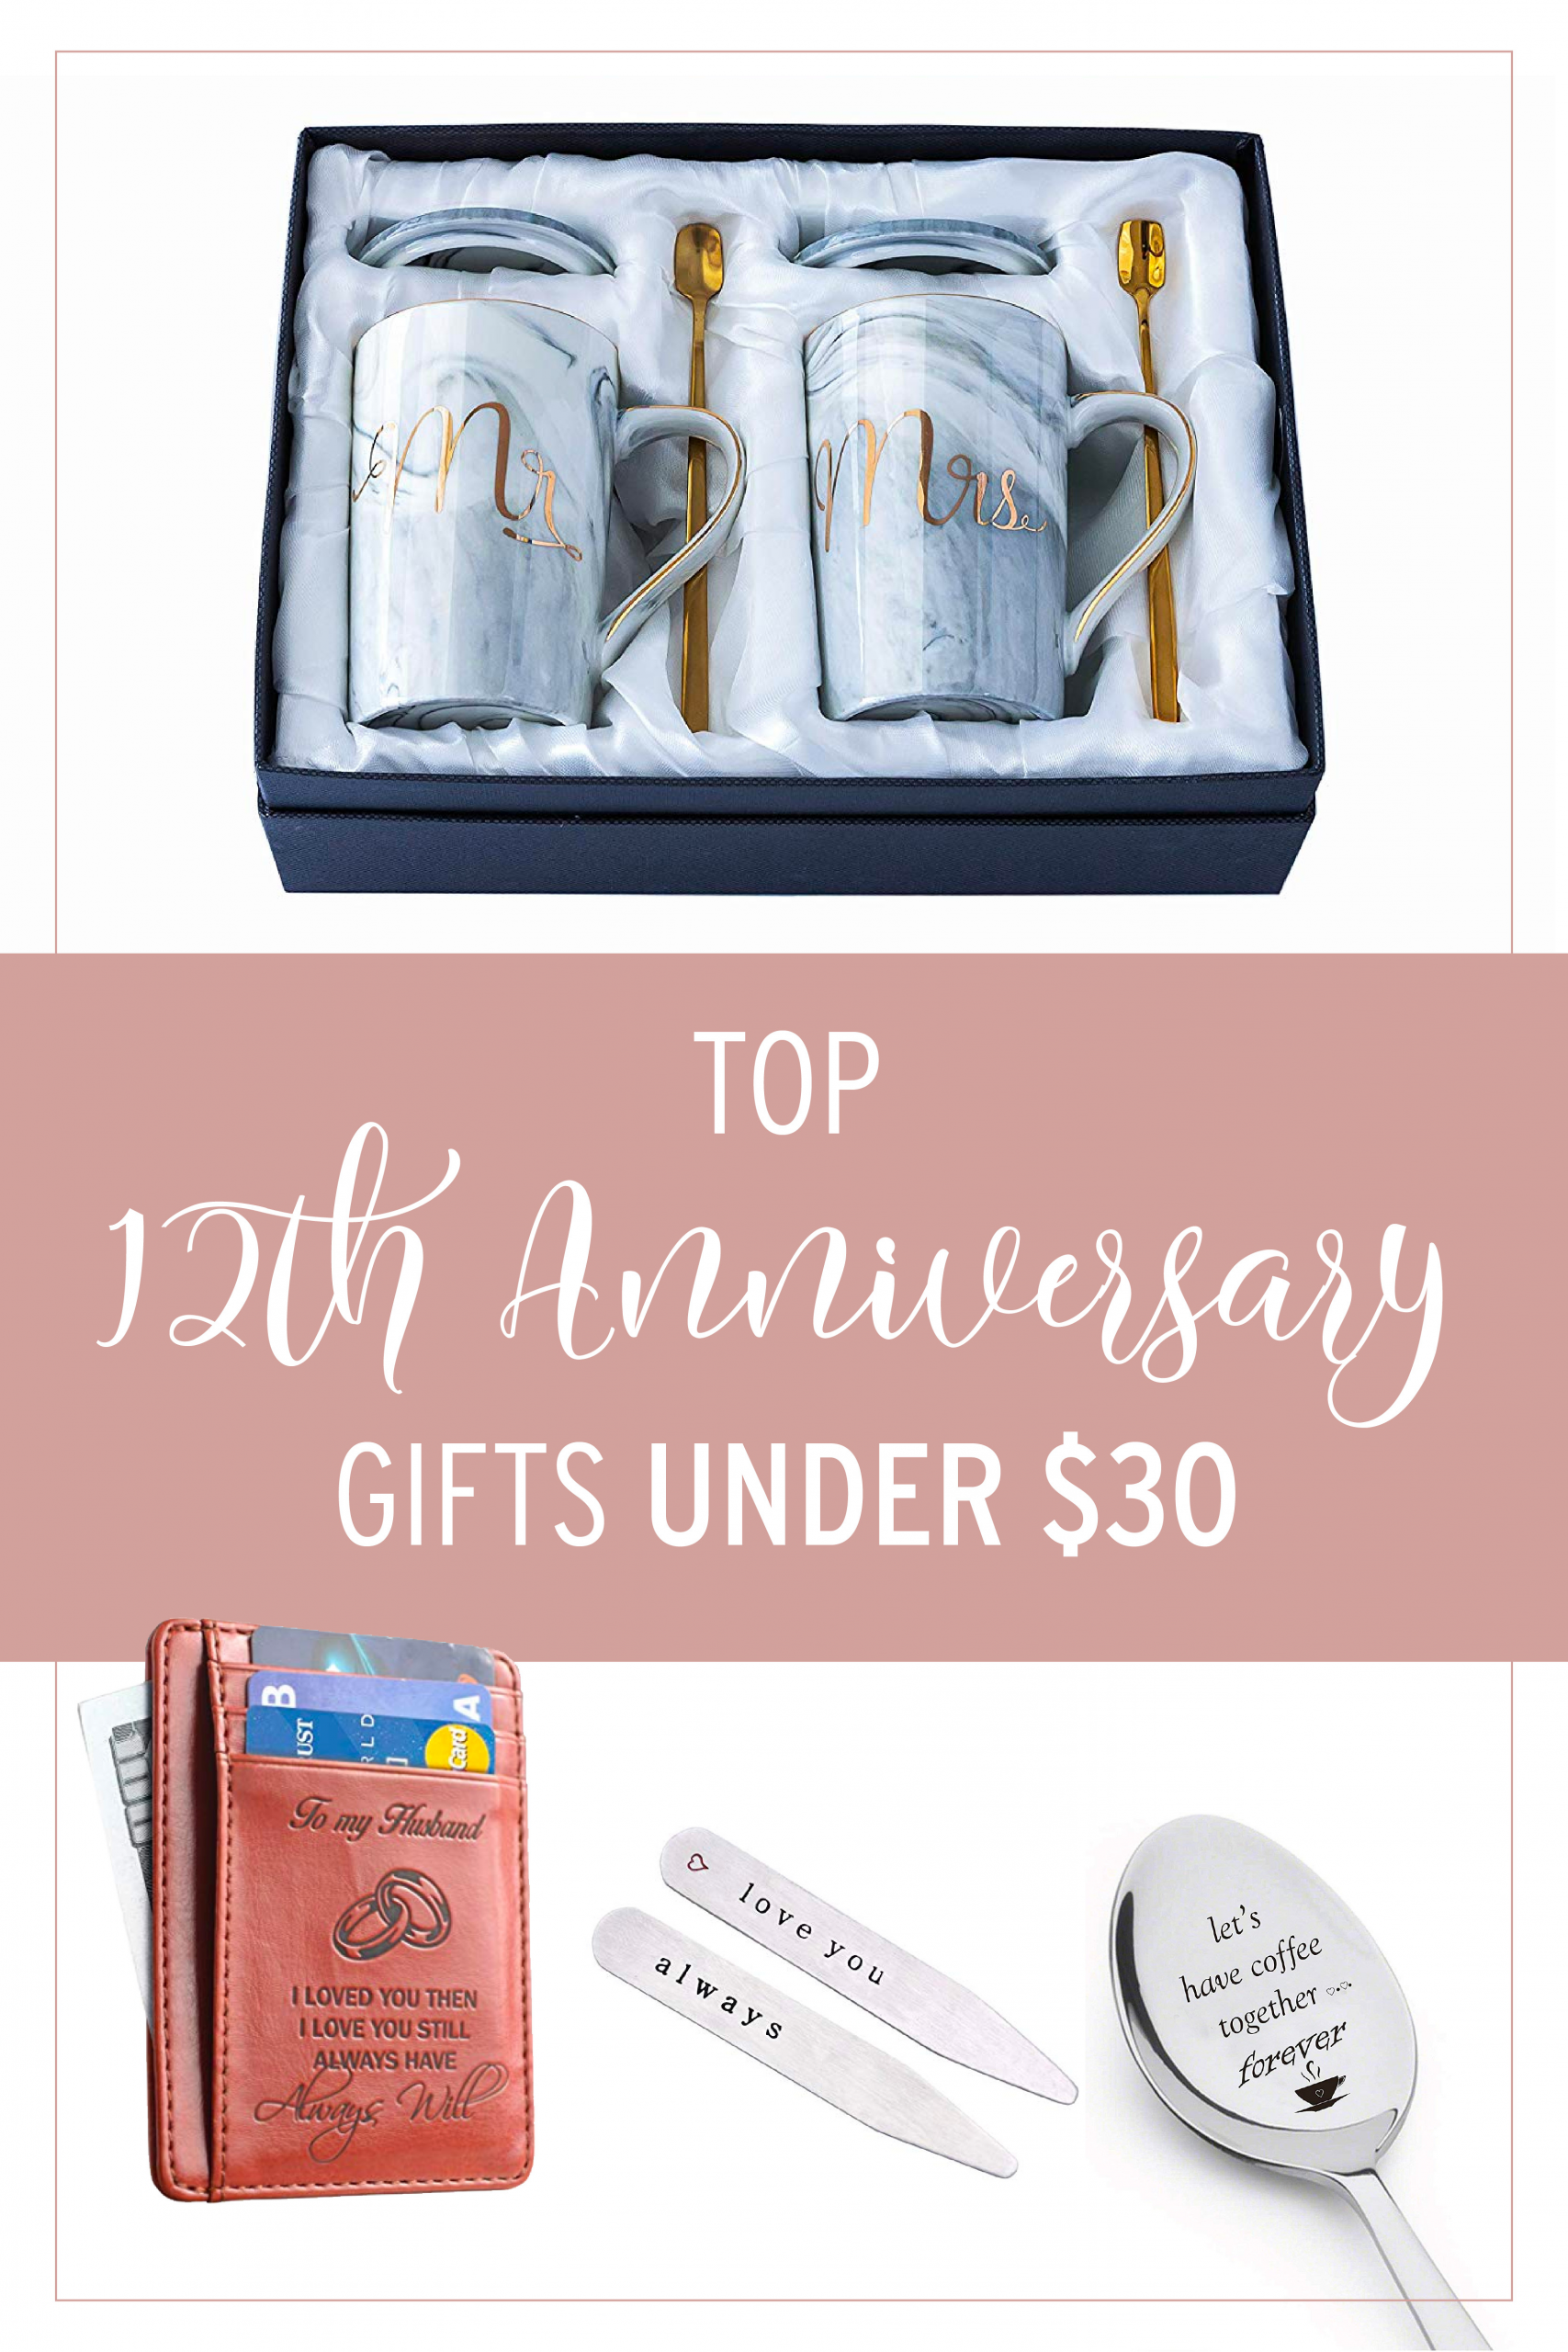 12Th Anniversary Gift Ideas
 12th Anniversray Gifts for Him Under $30